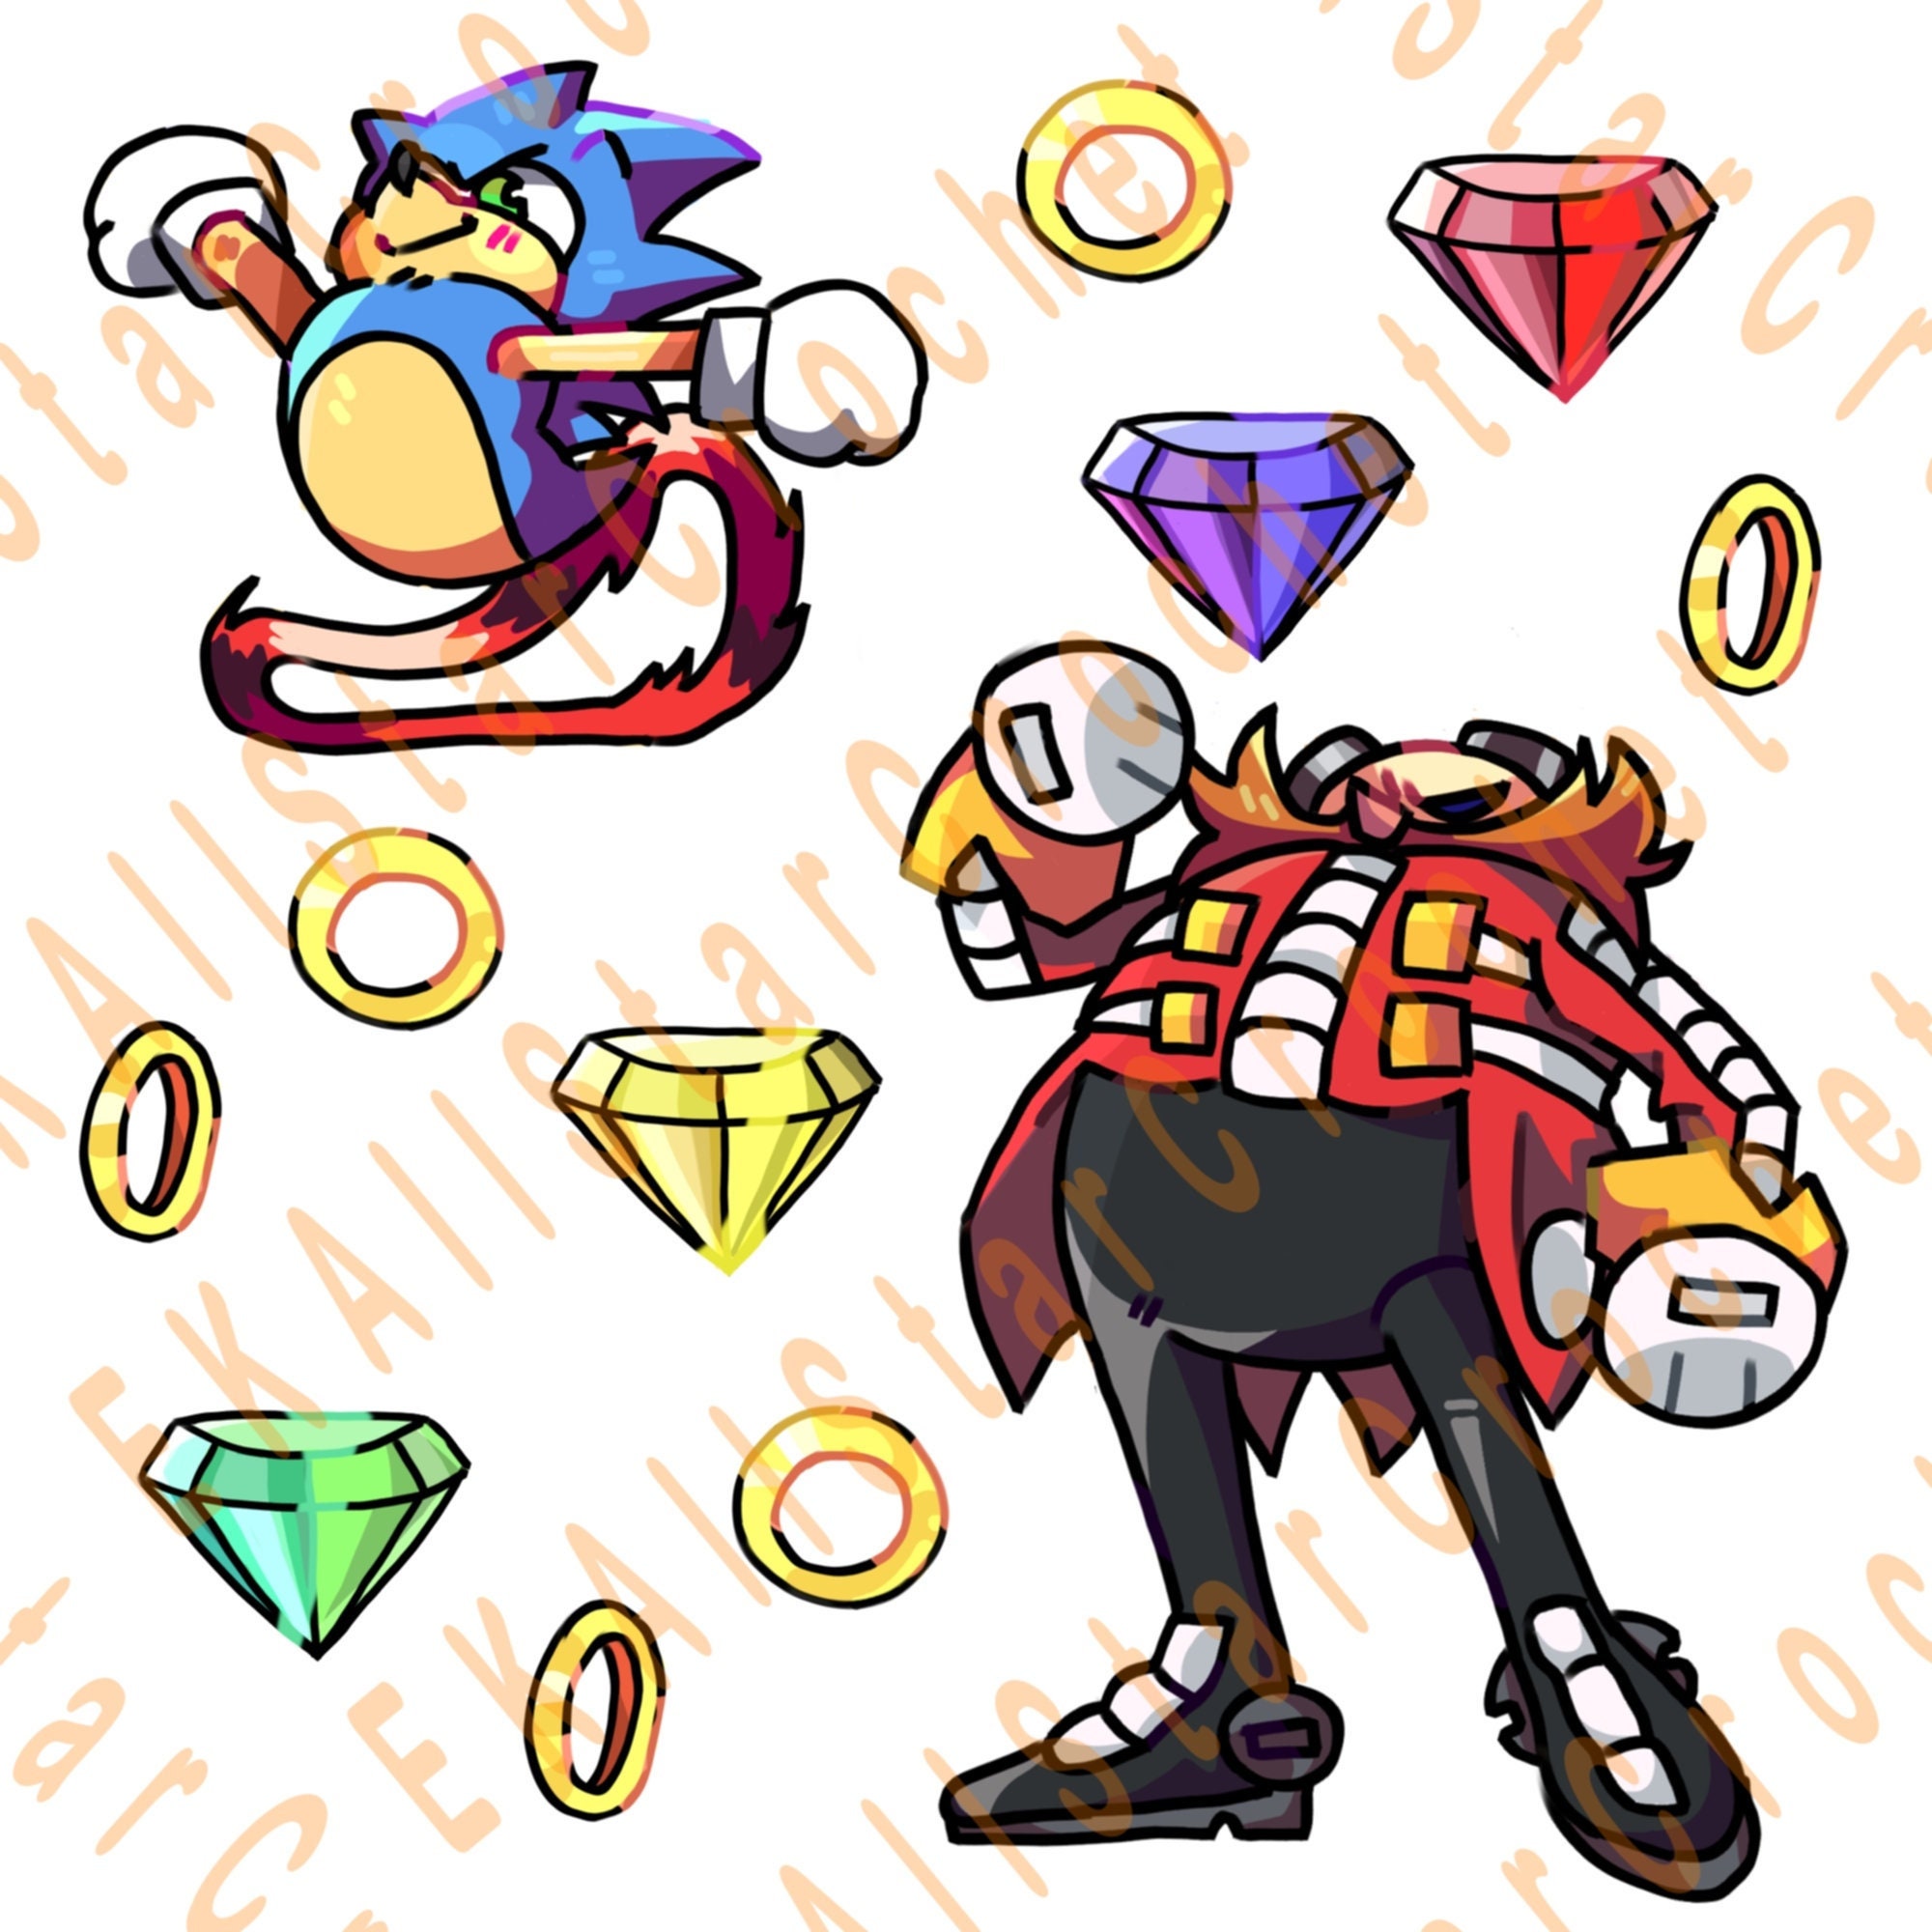 SONIC THE HEDGEHOG CHAOS EMERALDS FUll SET PLUS 10 GOLD RINGS & 1 SONIC  STICKERS